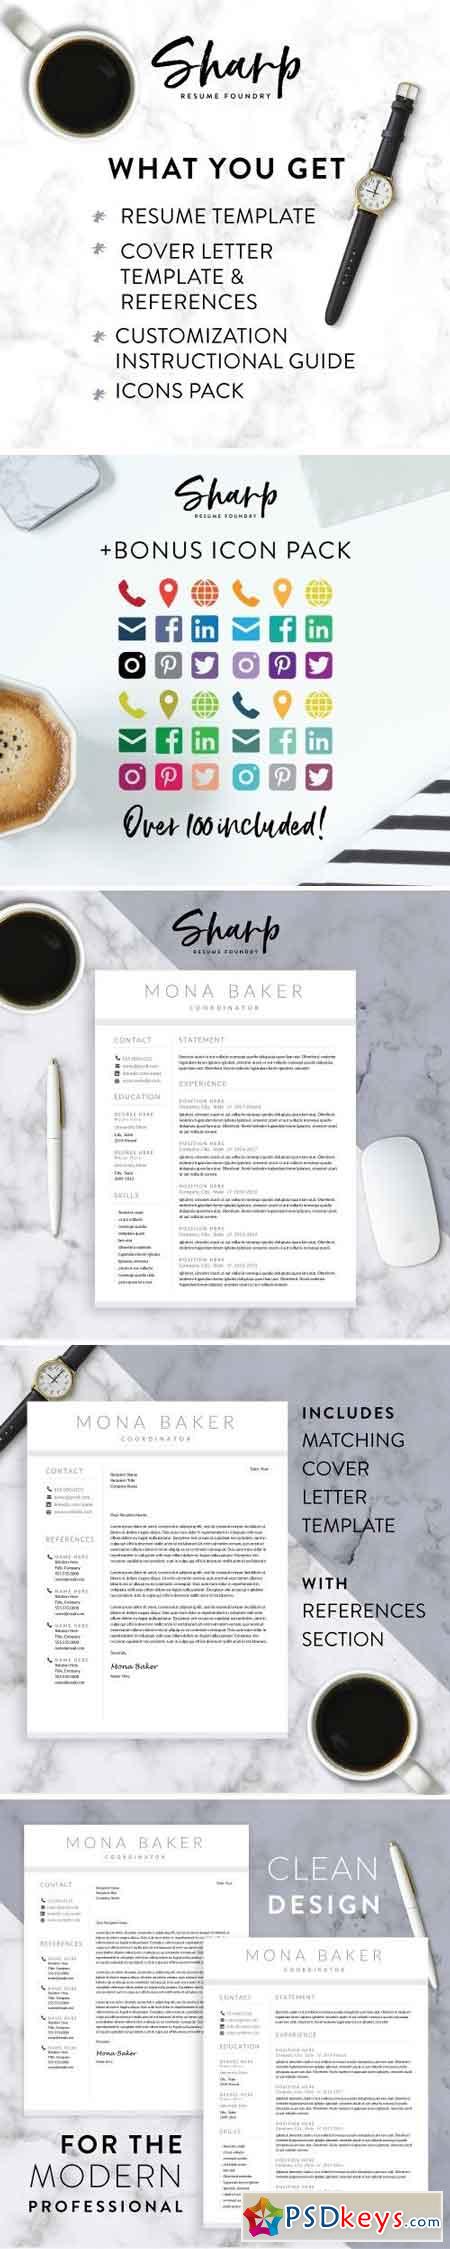 Modern Resume Template for Word 2160643